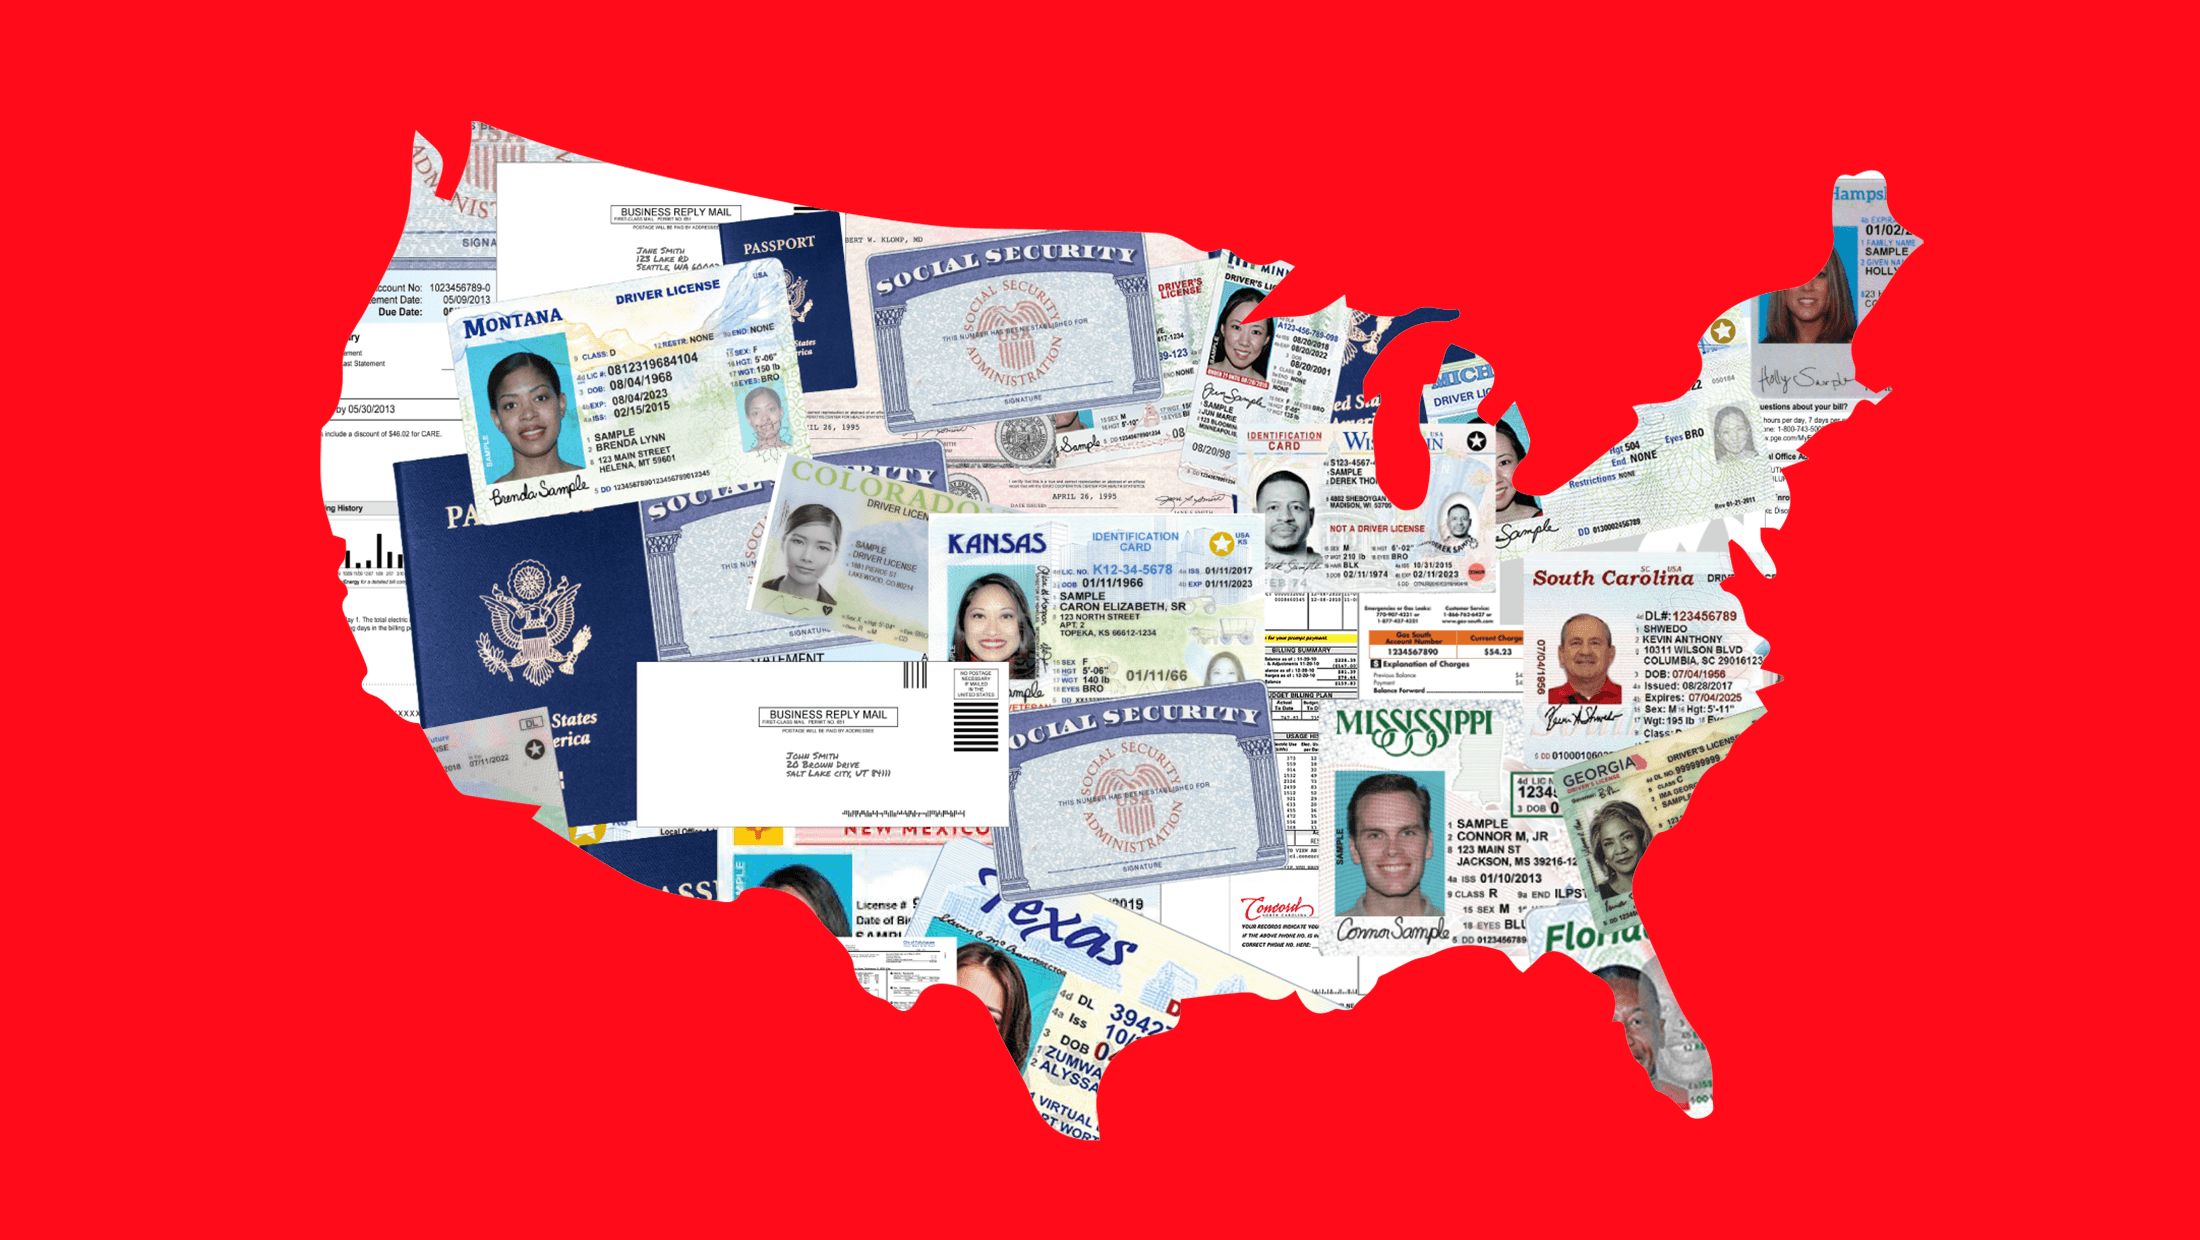 The map of the United States filled in with mail ballots and different forms of ID used to vote including driver's licenses, Social Security cards and U.S. passports